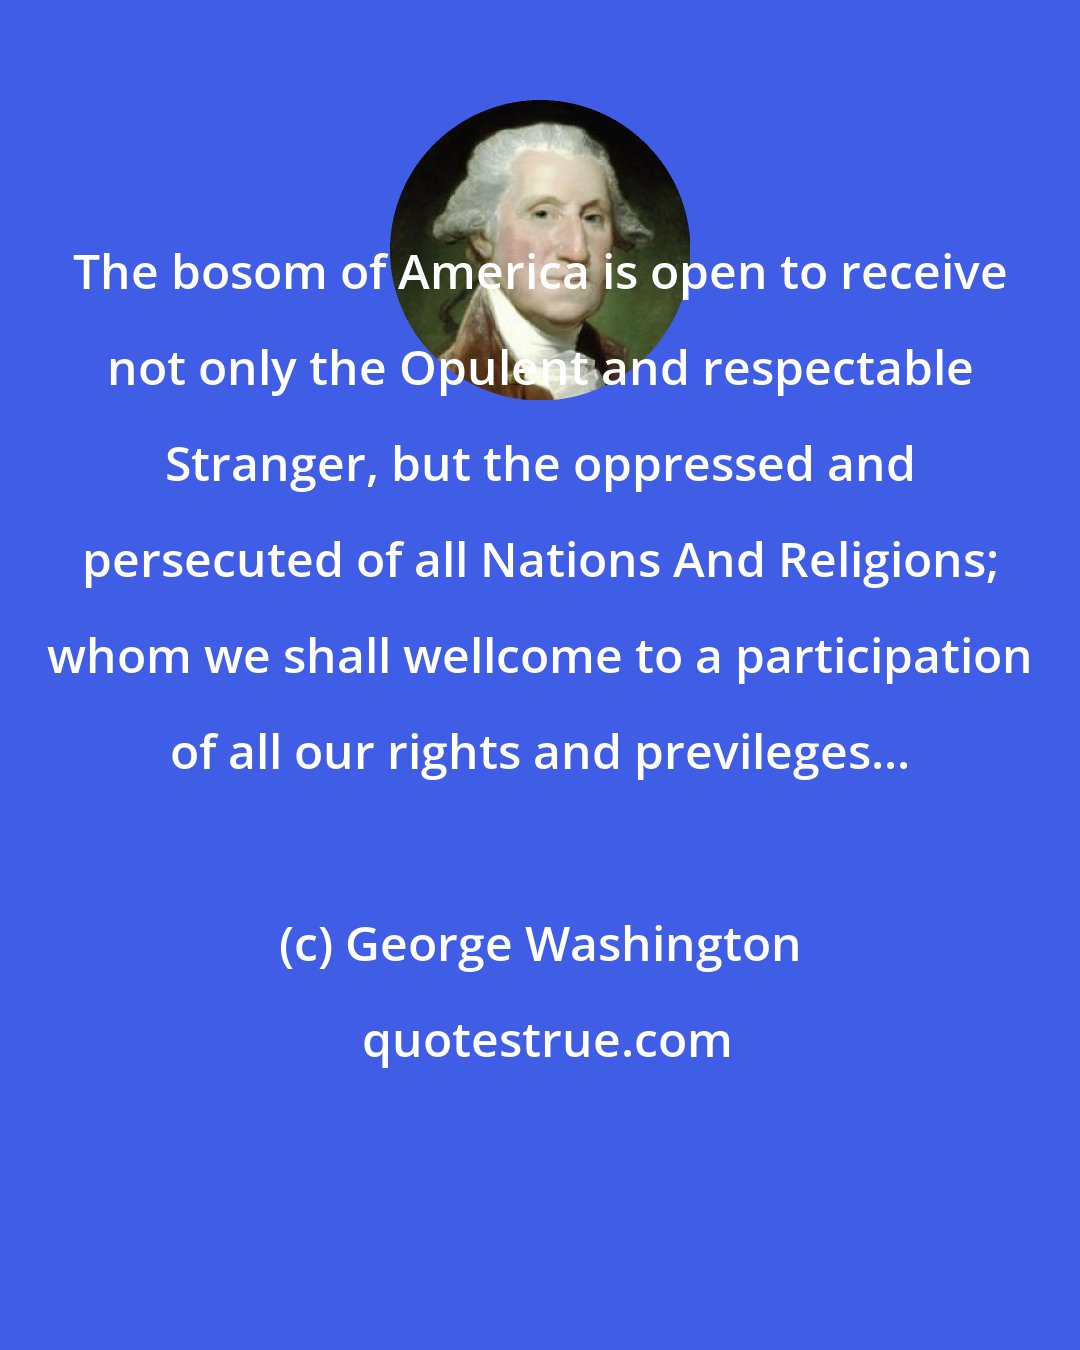 George Washington: The bosom of America is open to receive not only the Opulent and respectable Stranger, but the oppressed and persecuted of all Nations And Religions; whom we shall wellcome to a participation of all our rights and previleges...